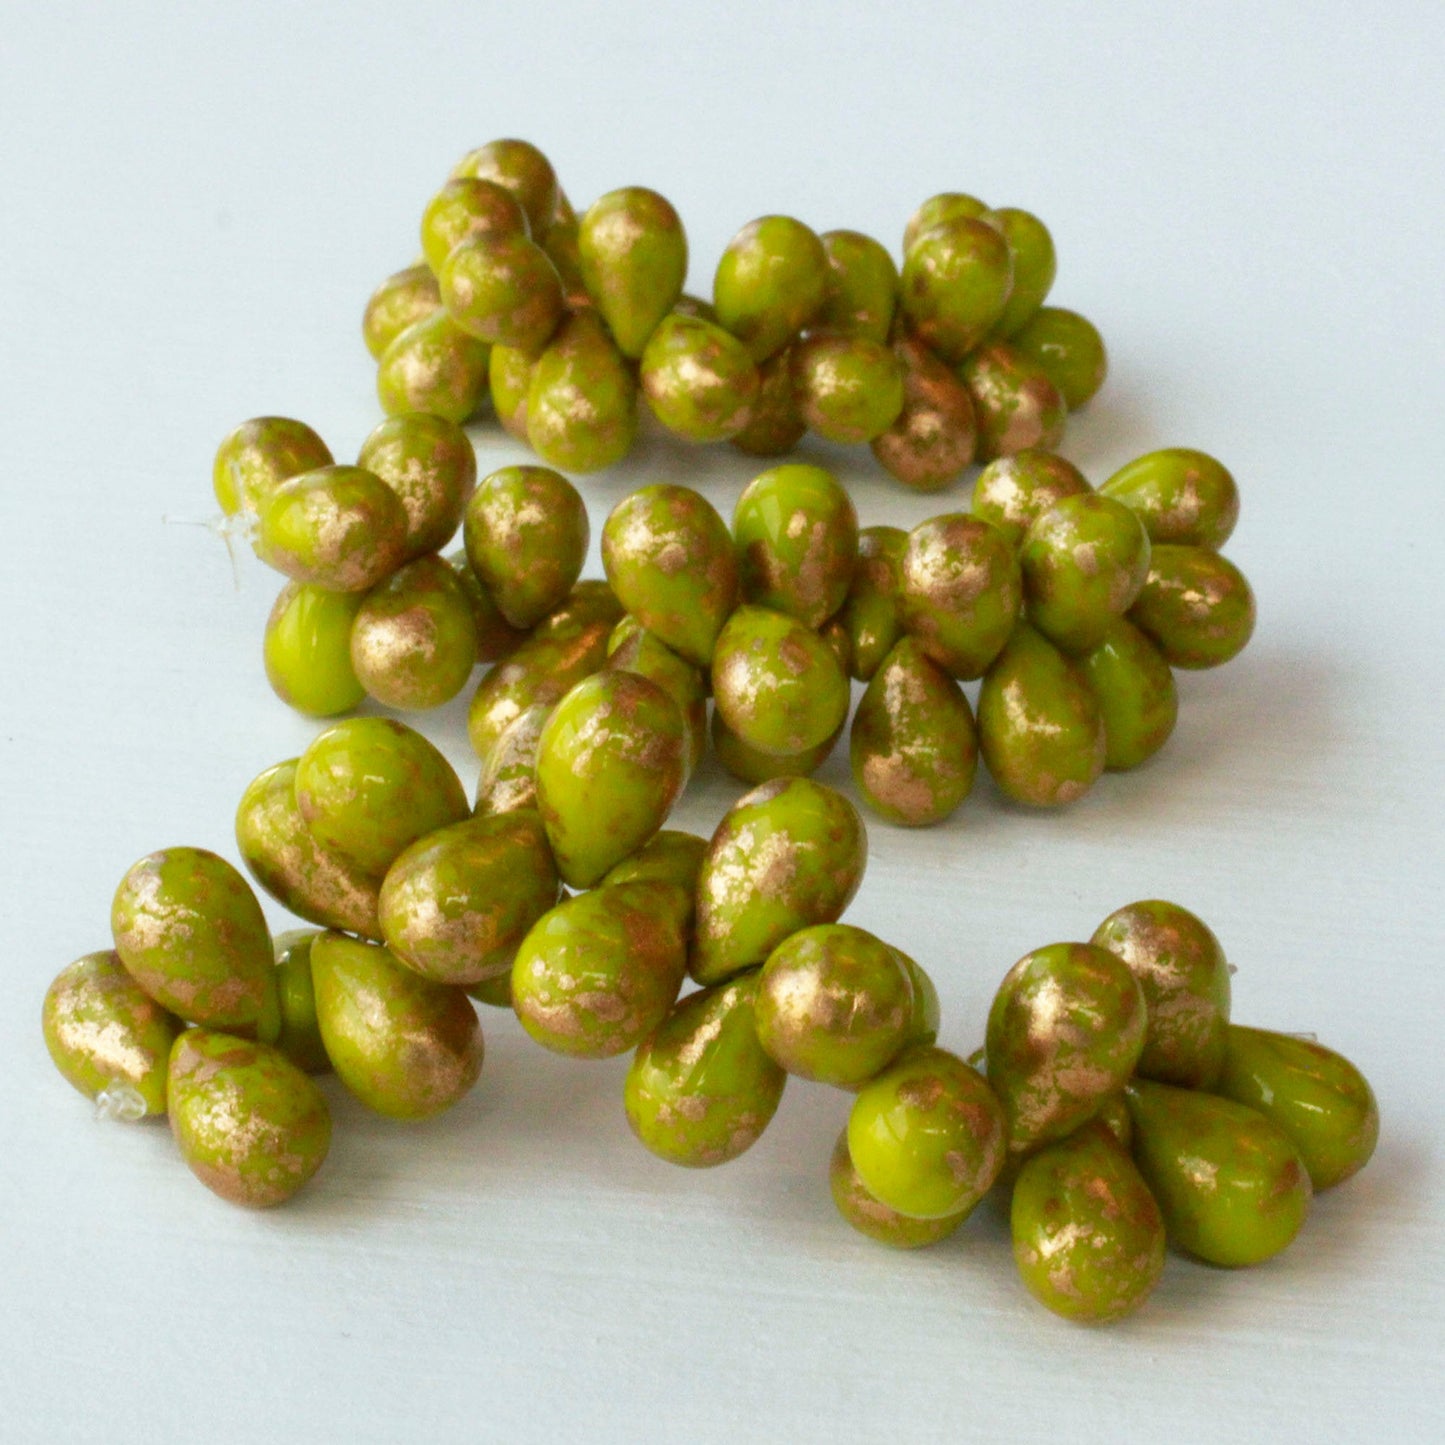 Load image into Gallery viewer, 6x9mm Glass Teardrop Beads - Avocado Green with Gold Dust - 25 Beads
